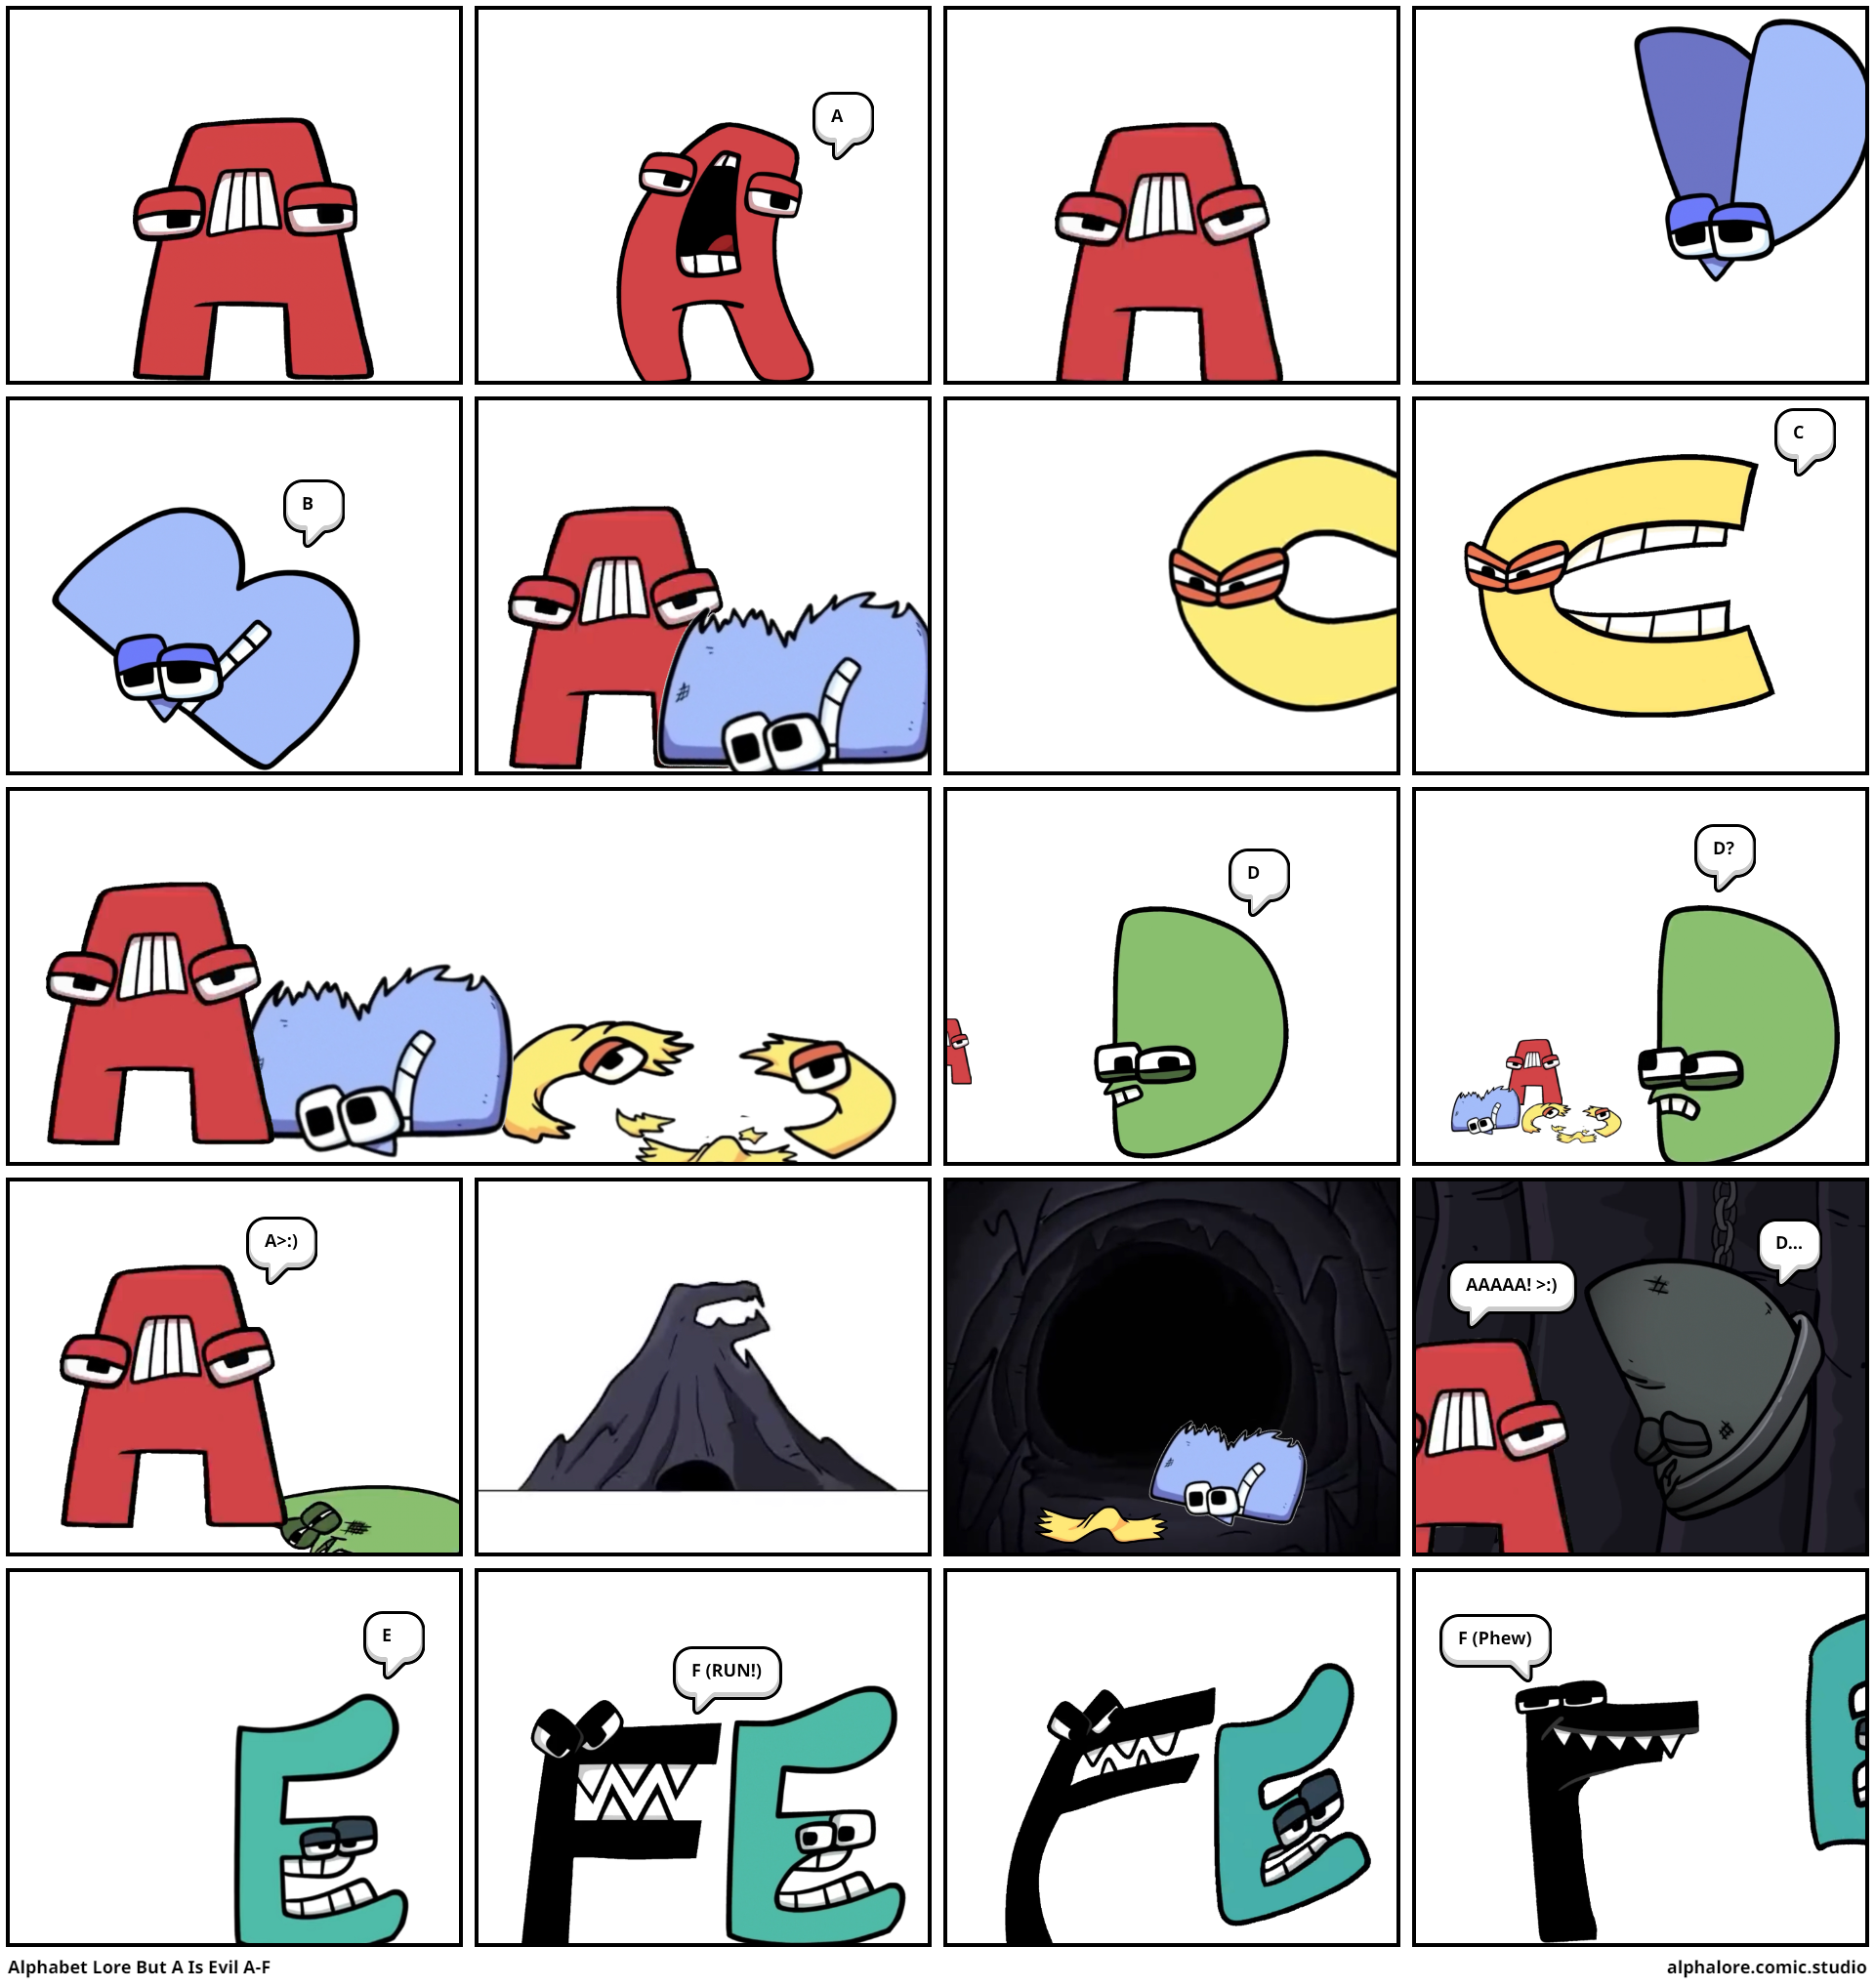 Alphabet Lore But They Evil 